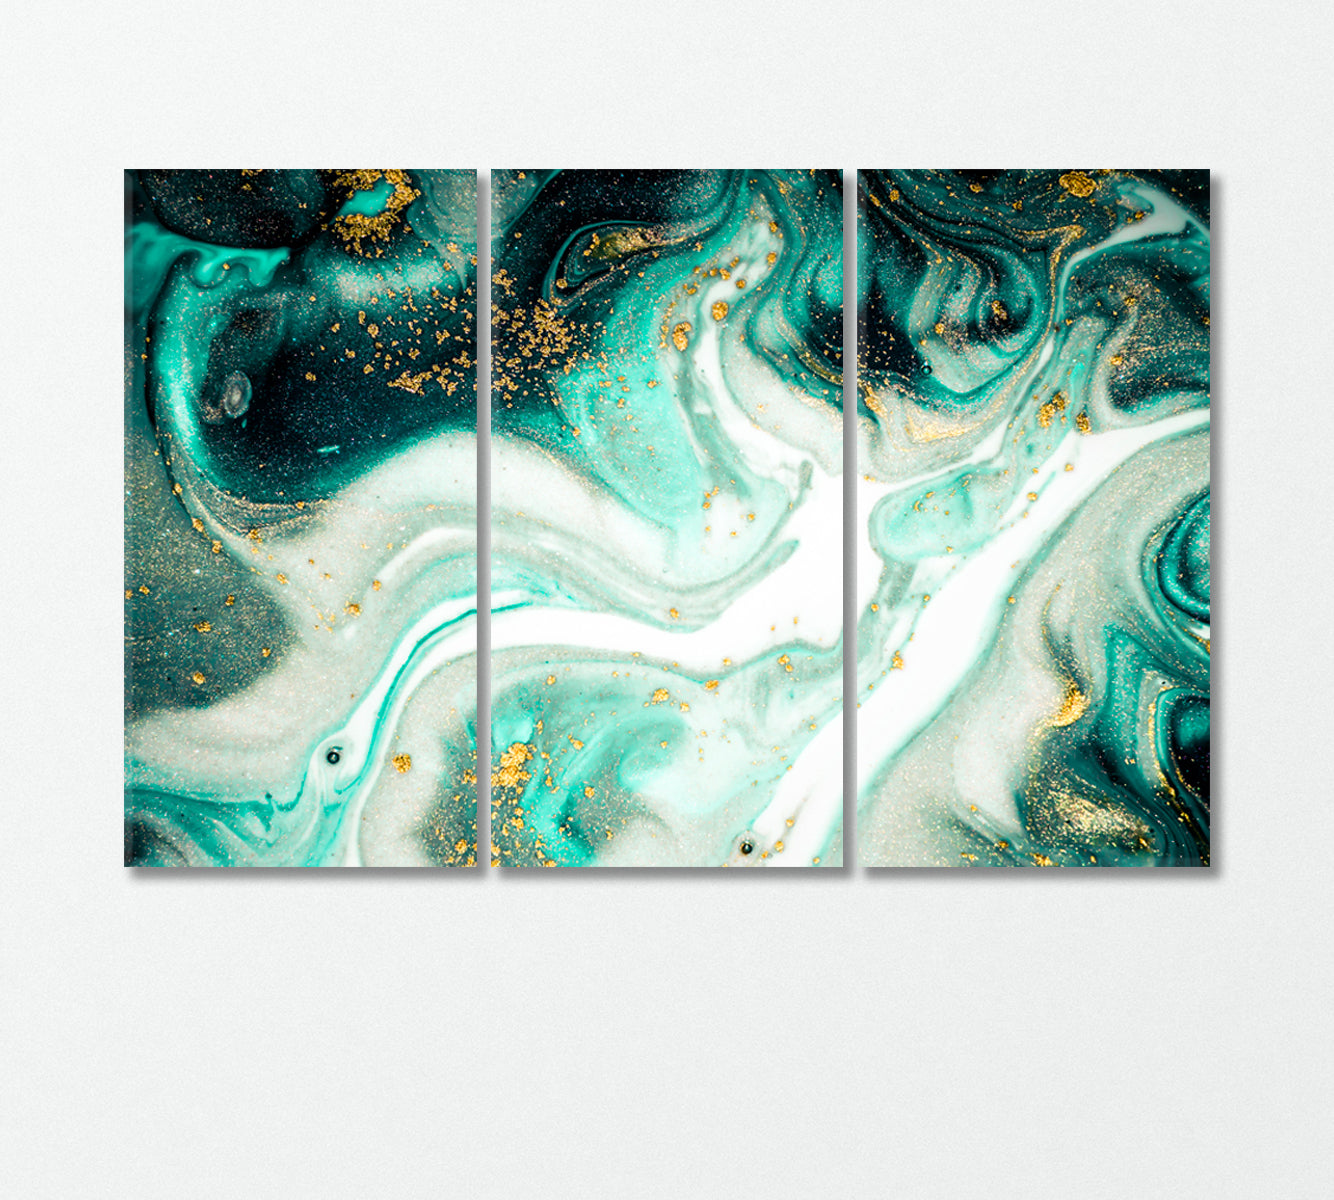 Abstract Oriental Turquoise Wave Pattern Canvas Print-Canvas Print-CetArt-3 Panels-36x24 inches-CetArt